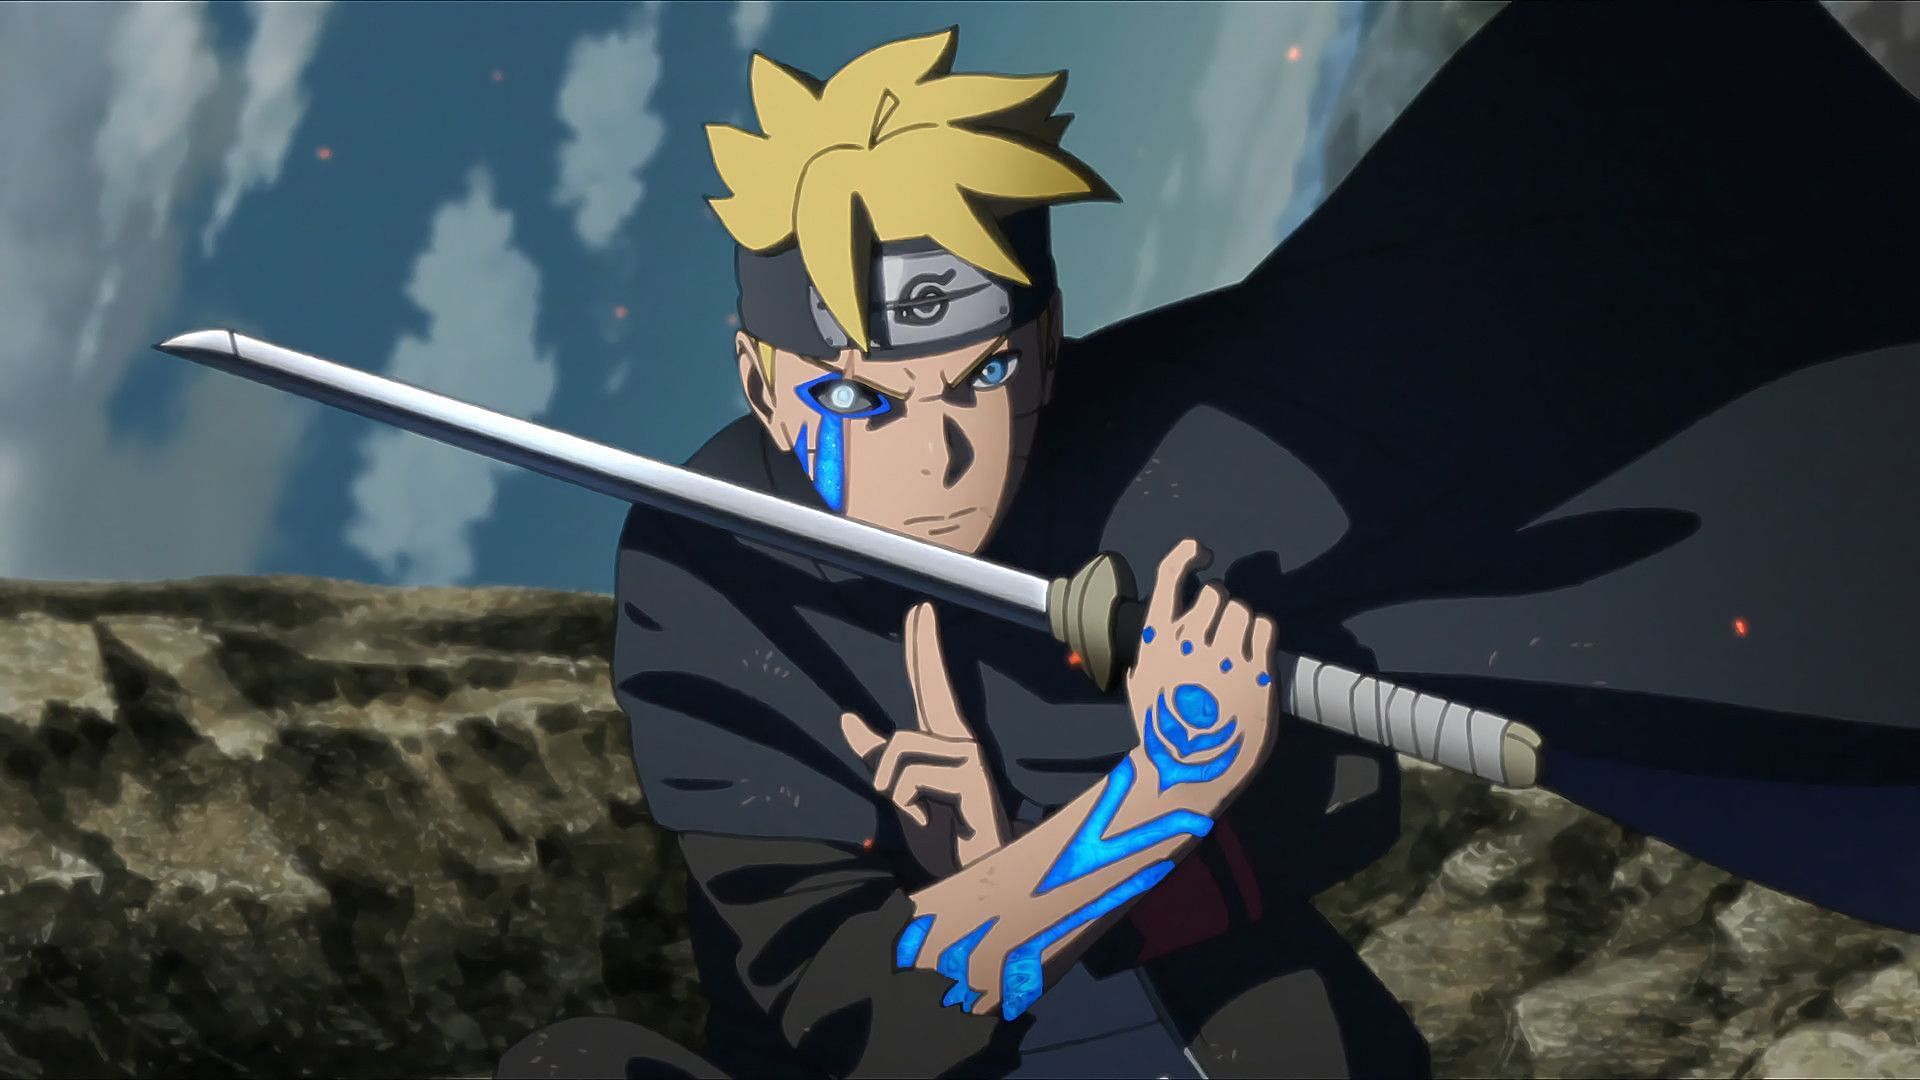 Boruto's Fight With Kawaki is Actually a Battle Between Two Big Villains